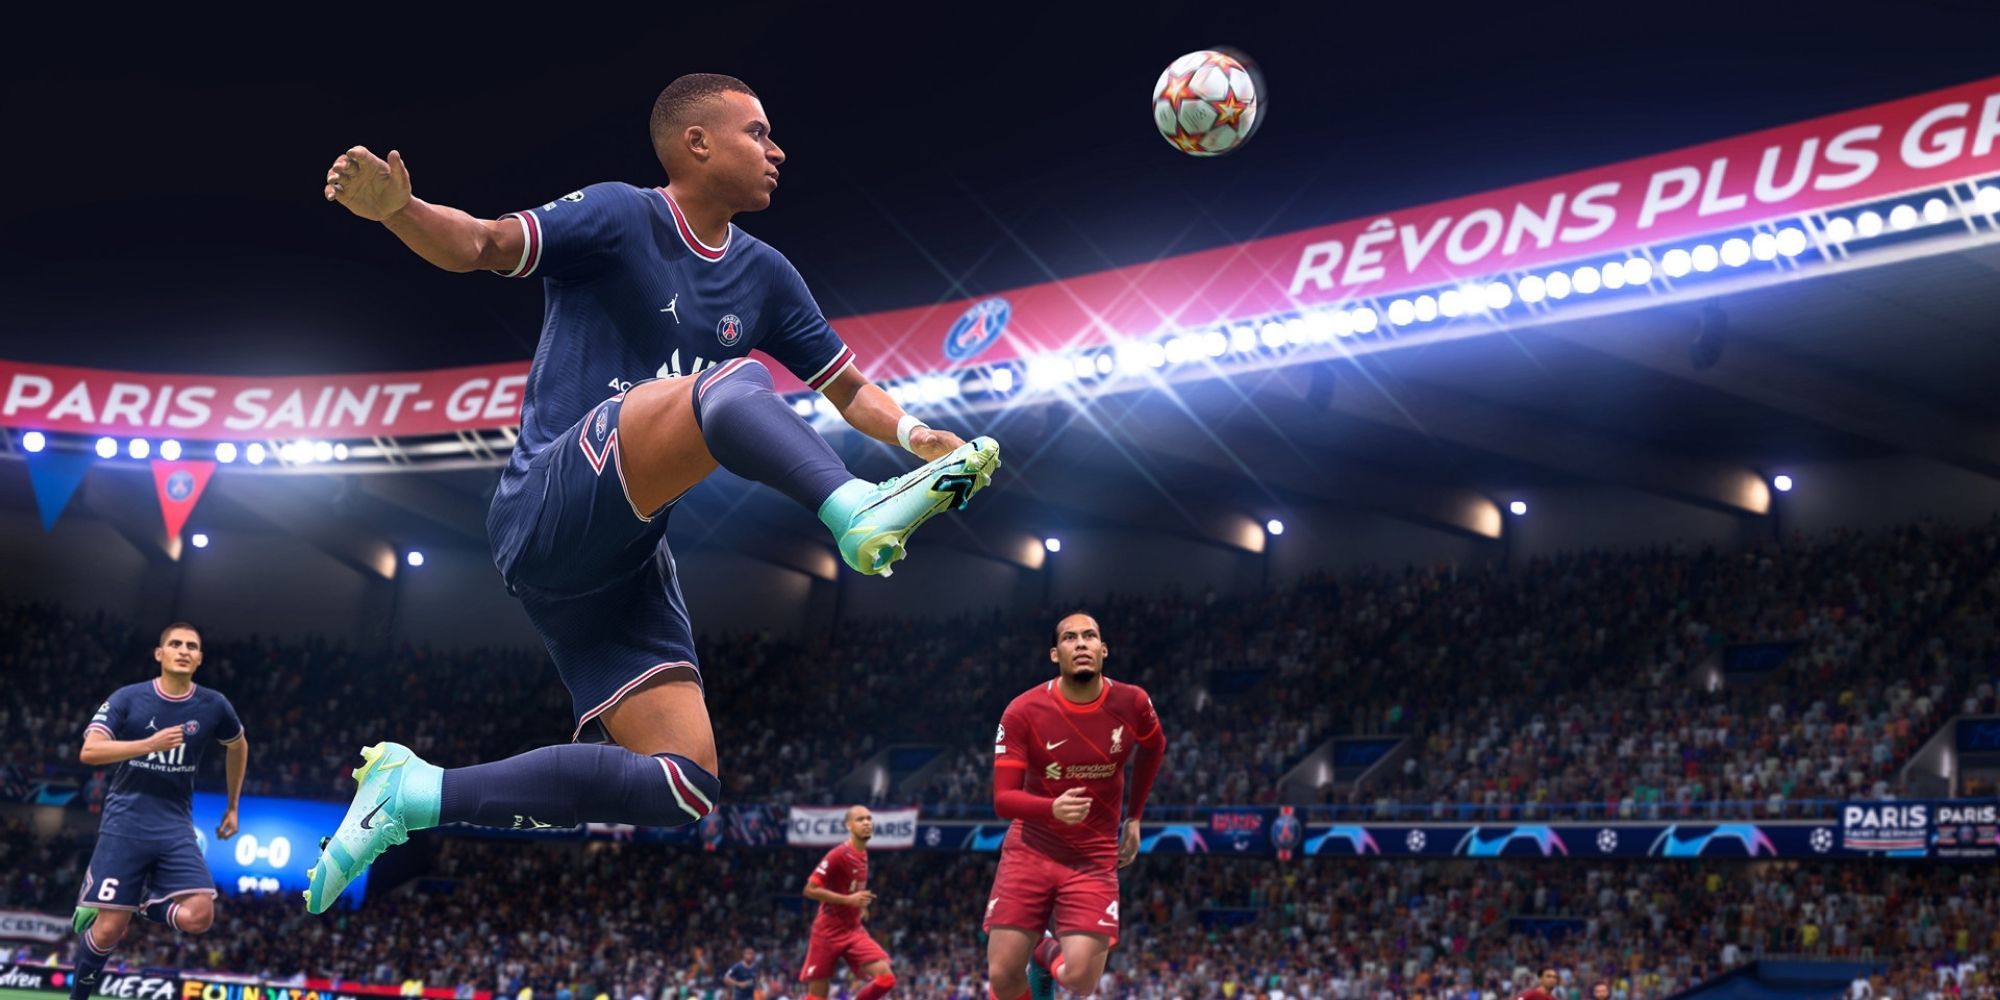 FIFA game modes: check out the main ones and their characteristics